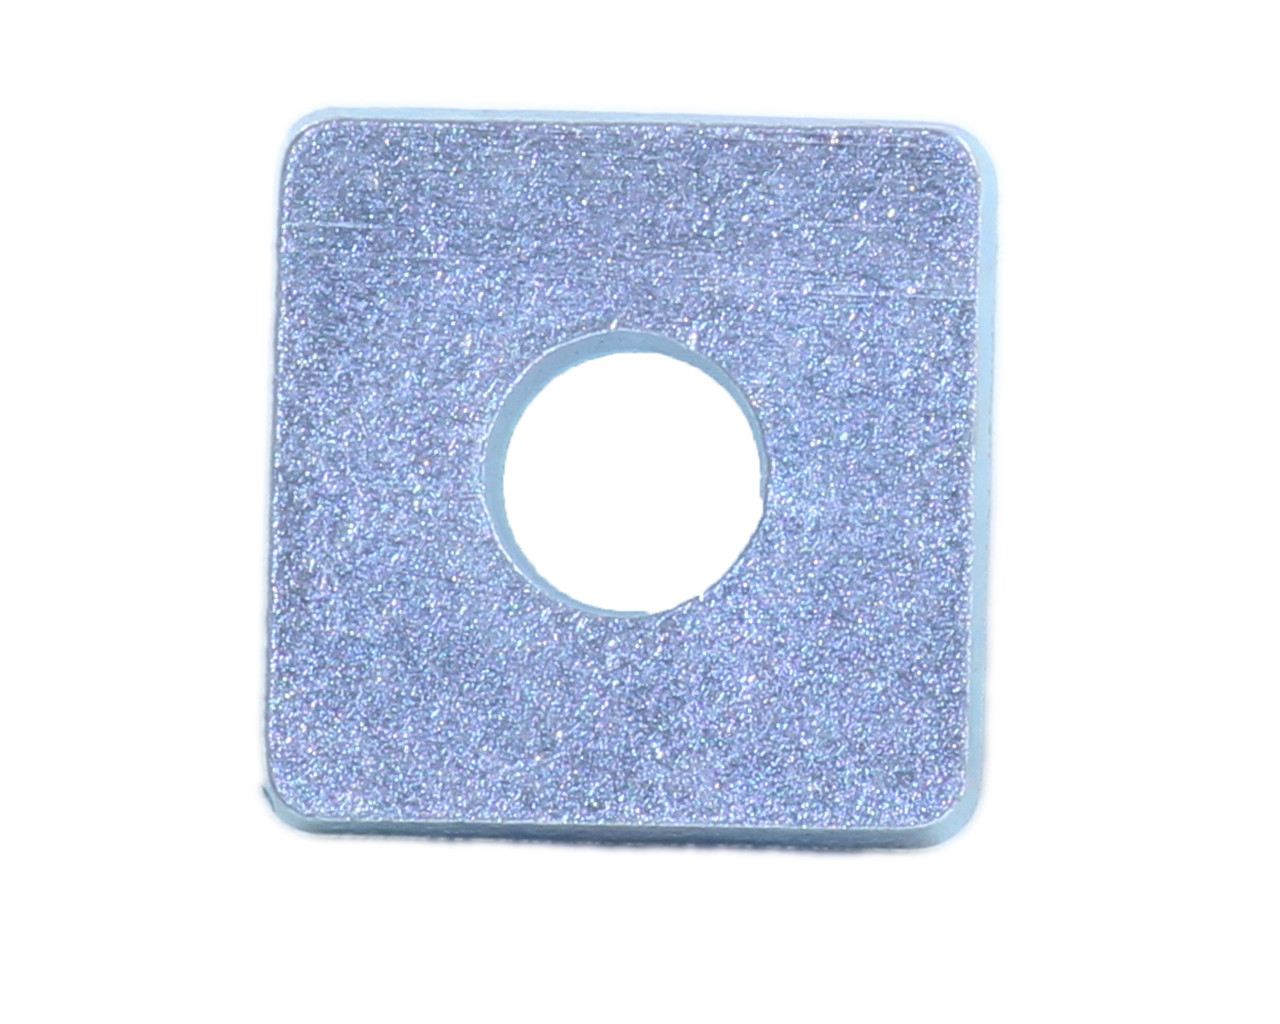 Thomas and Betts 48662 Square Channel Washer Hole Size: 9/16 Inch, Nominal Size: 1/2 Inch, Steel